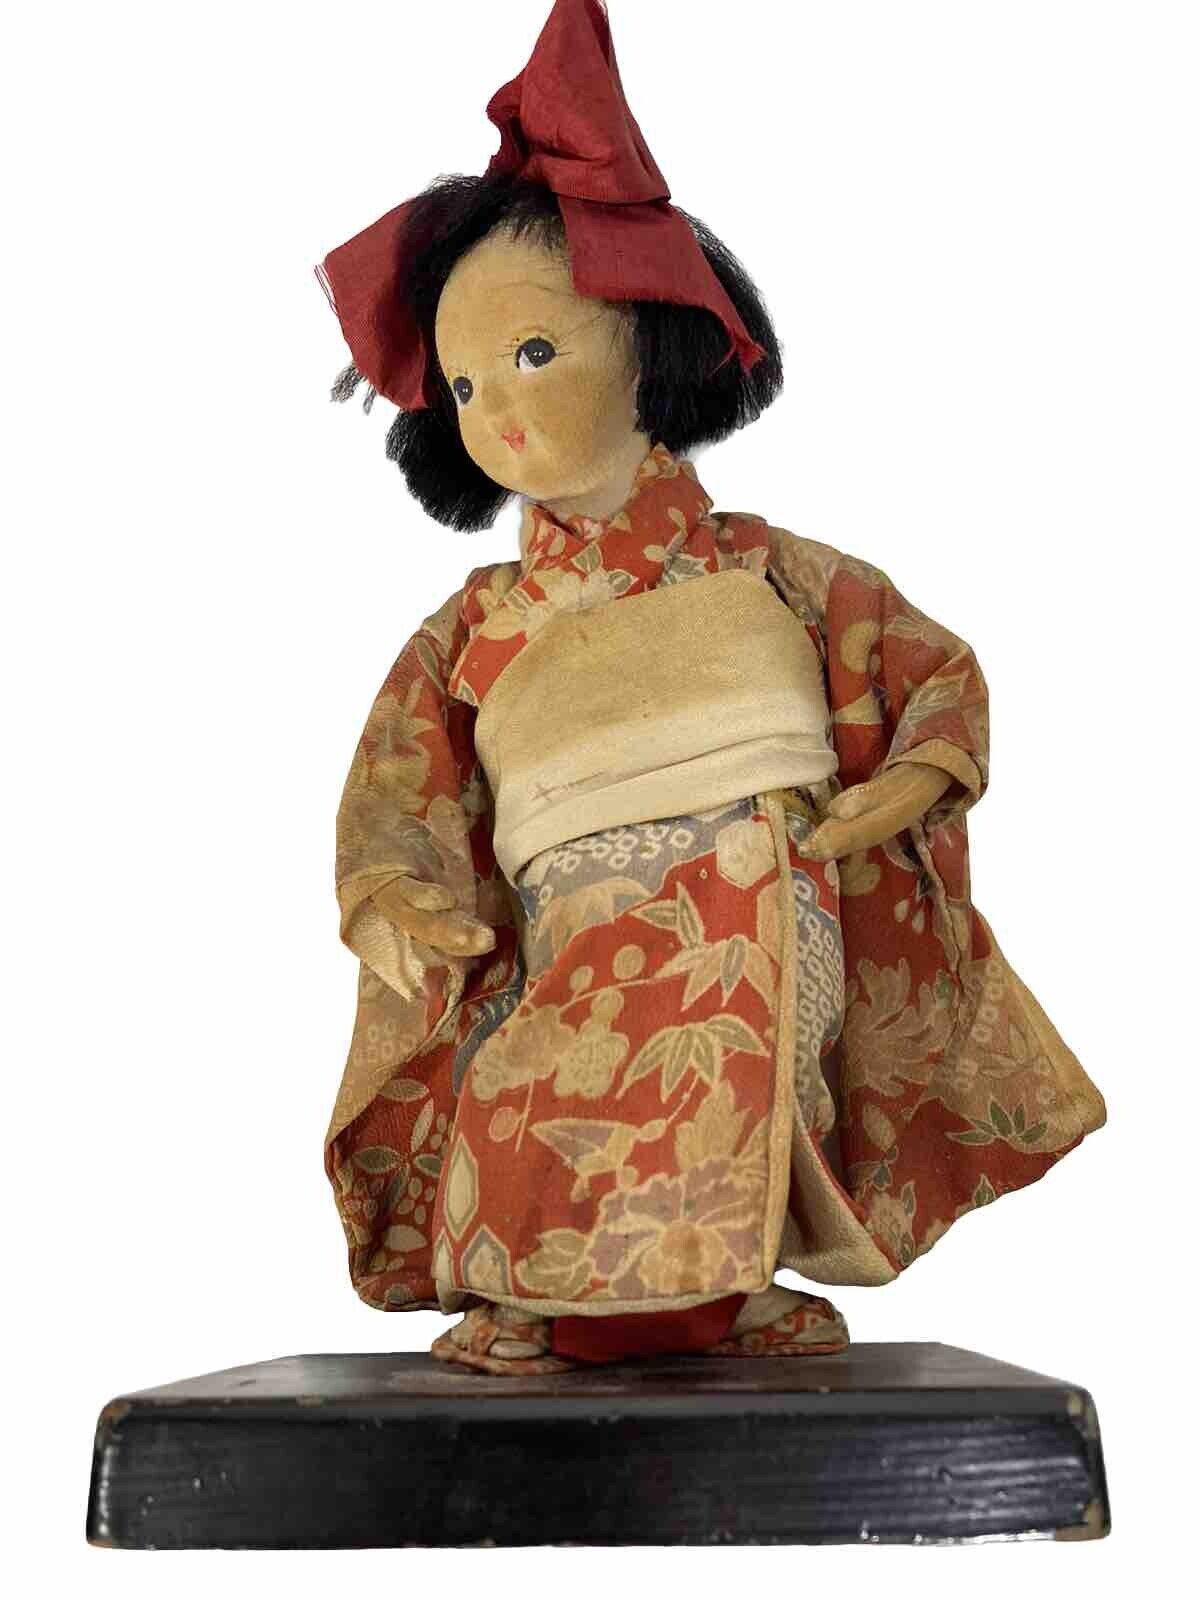 Vintage 1930s Japanese 8” Girl in a Kimono Doll Figure on Wood Base